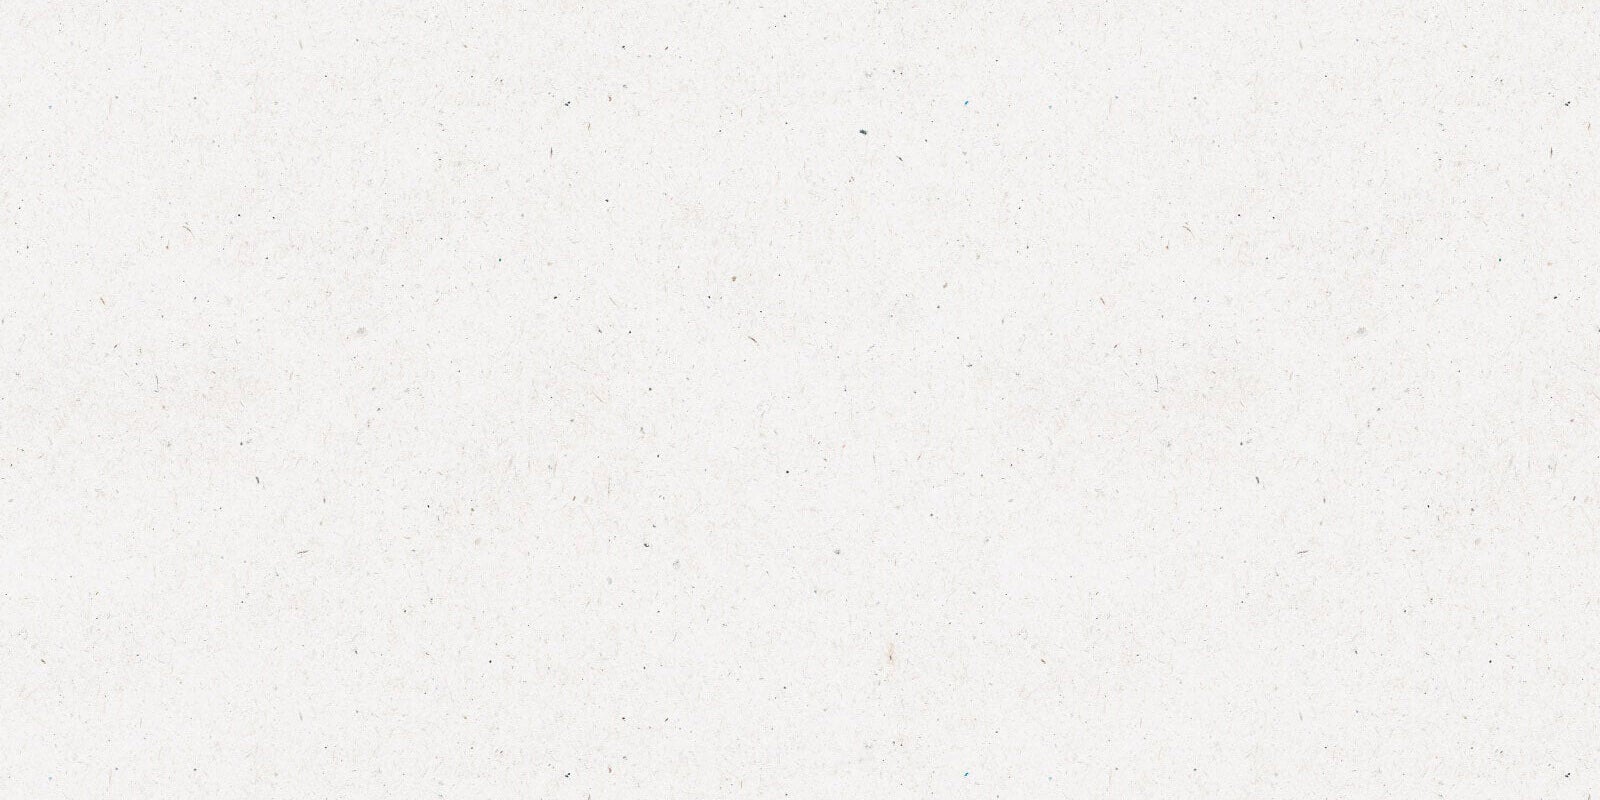 Recycled paper white background image